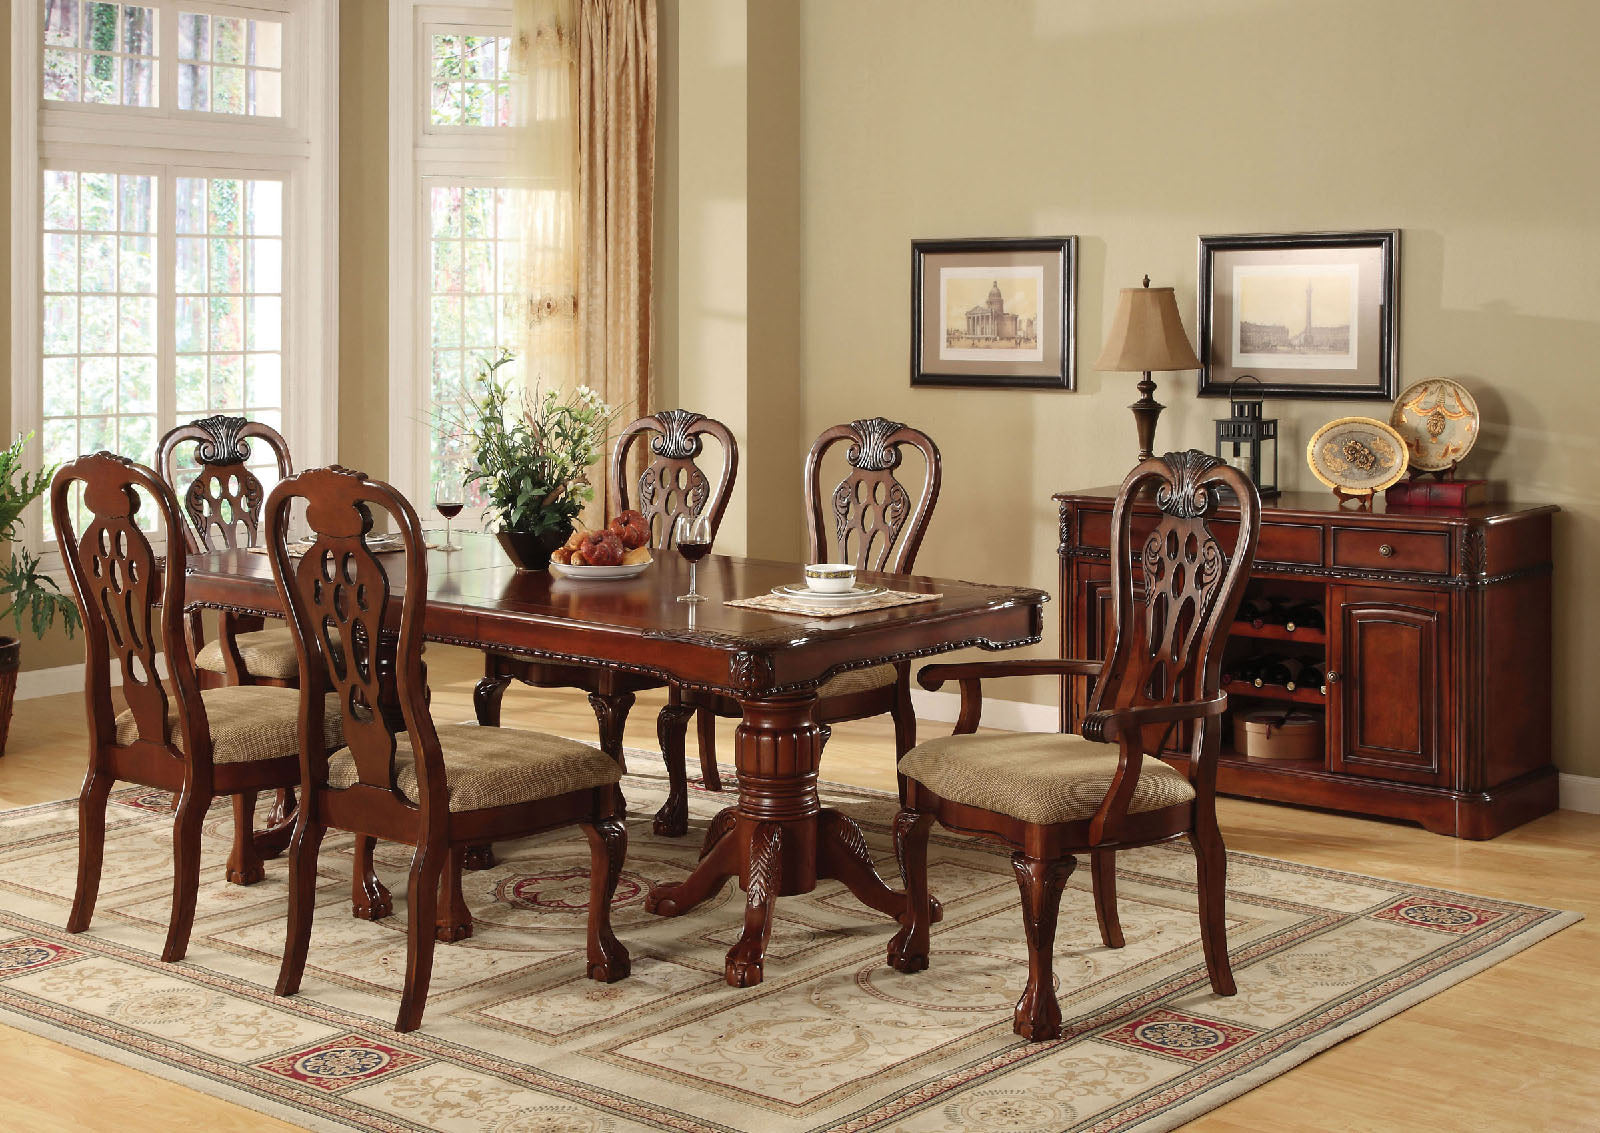 Dining Table w/ Double Pedestals